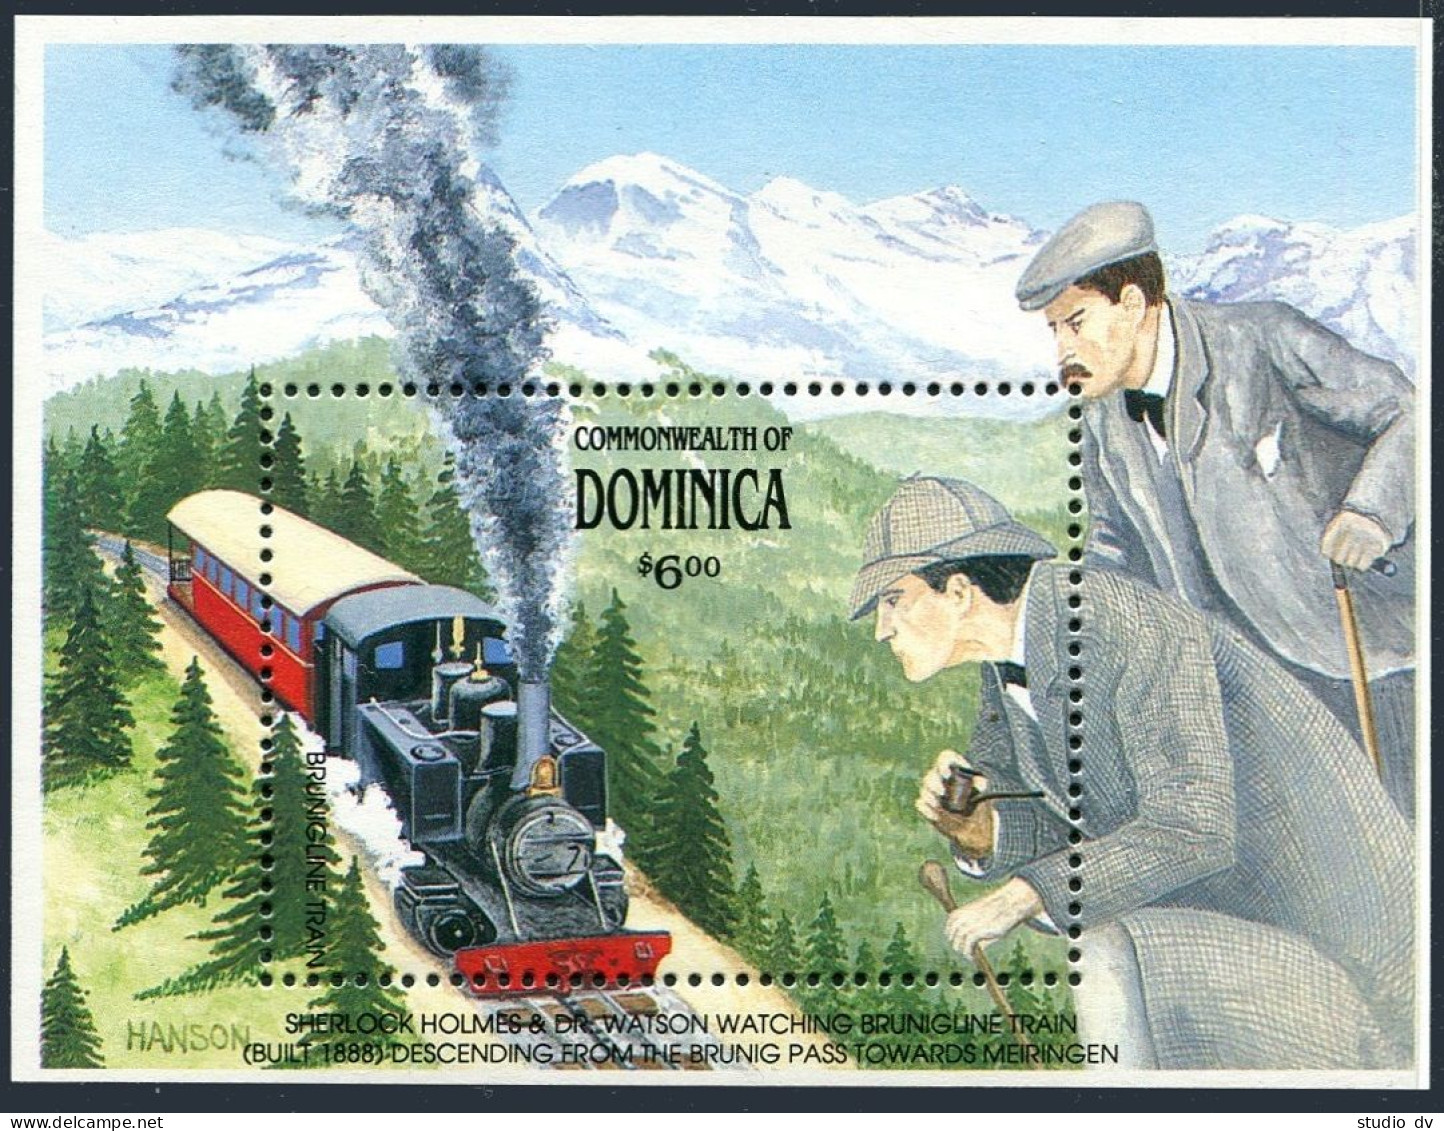 Dominica 1287-1294, 1295-1296 Sheets, MNH. Cog Trains Of Switzerland, 1991. - Dominique (1978-...)